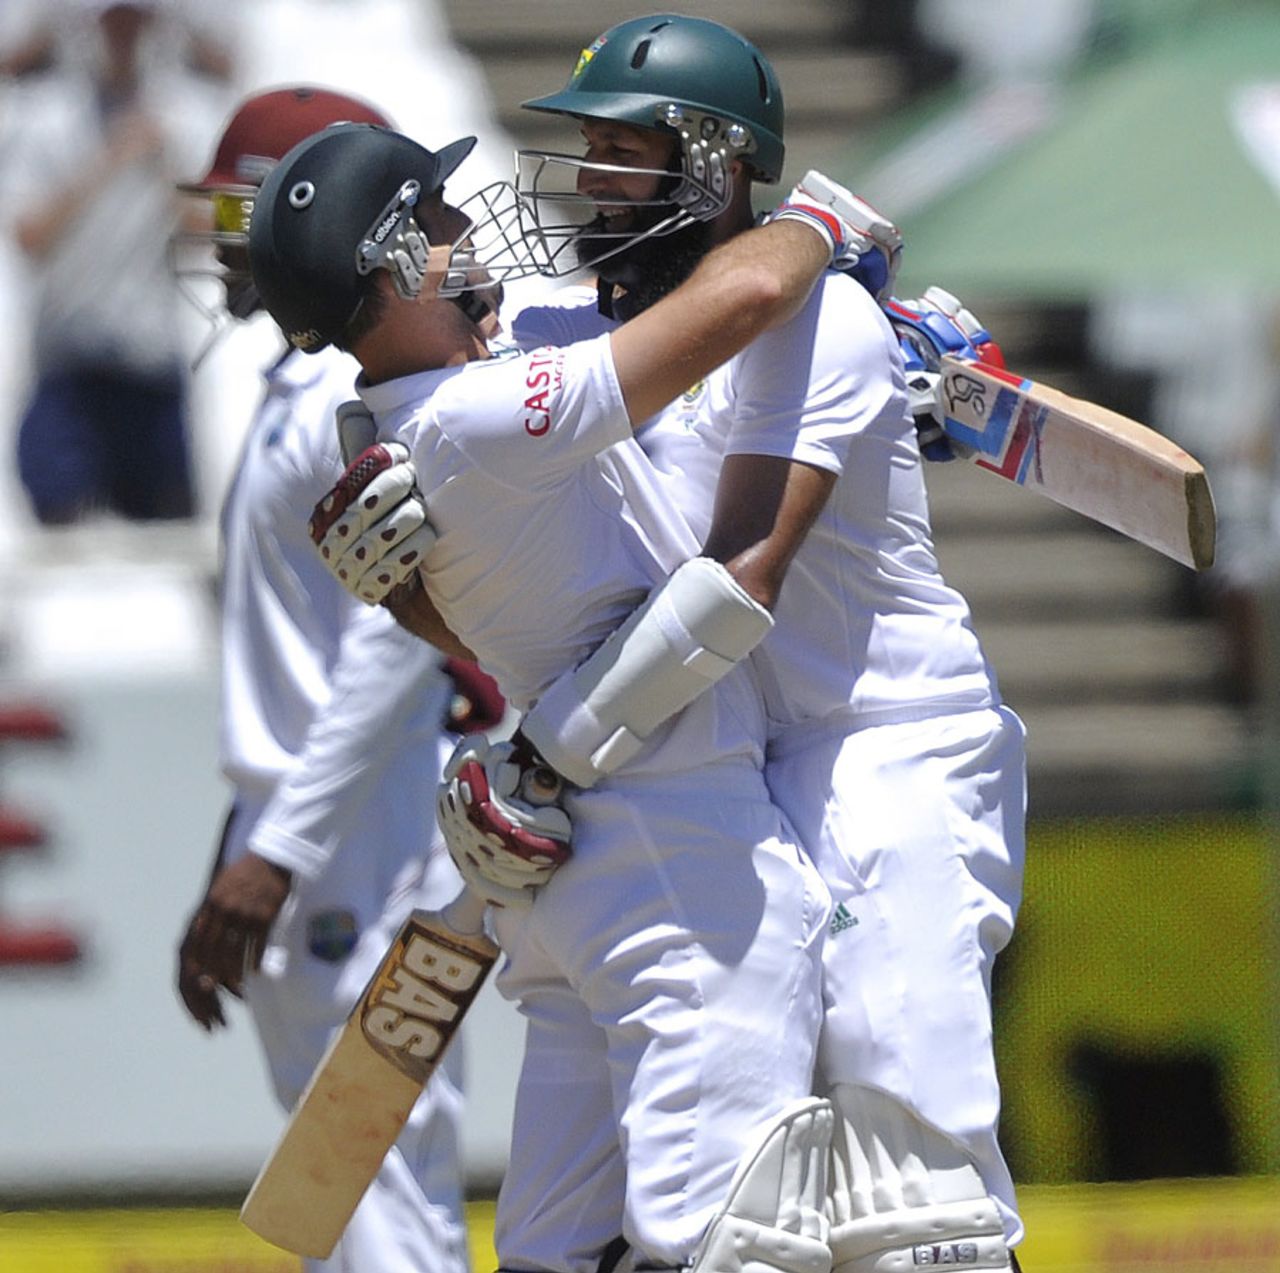 Dean Elgar and Hashim Amla embrace as they secure victory, South Africa v West Indies, 3rd Test, Cape Town, 5th day, January 6, 2014